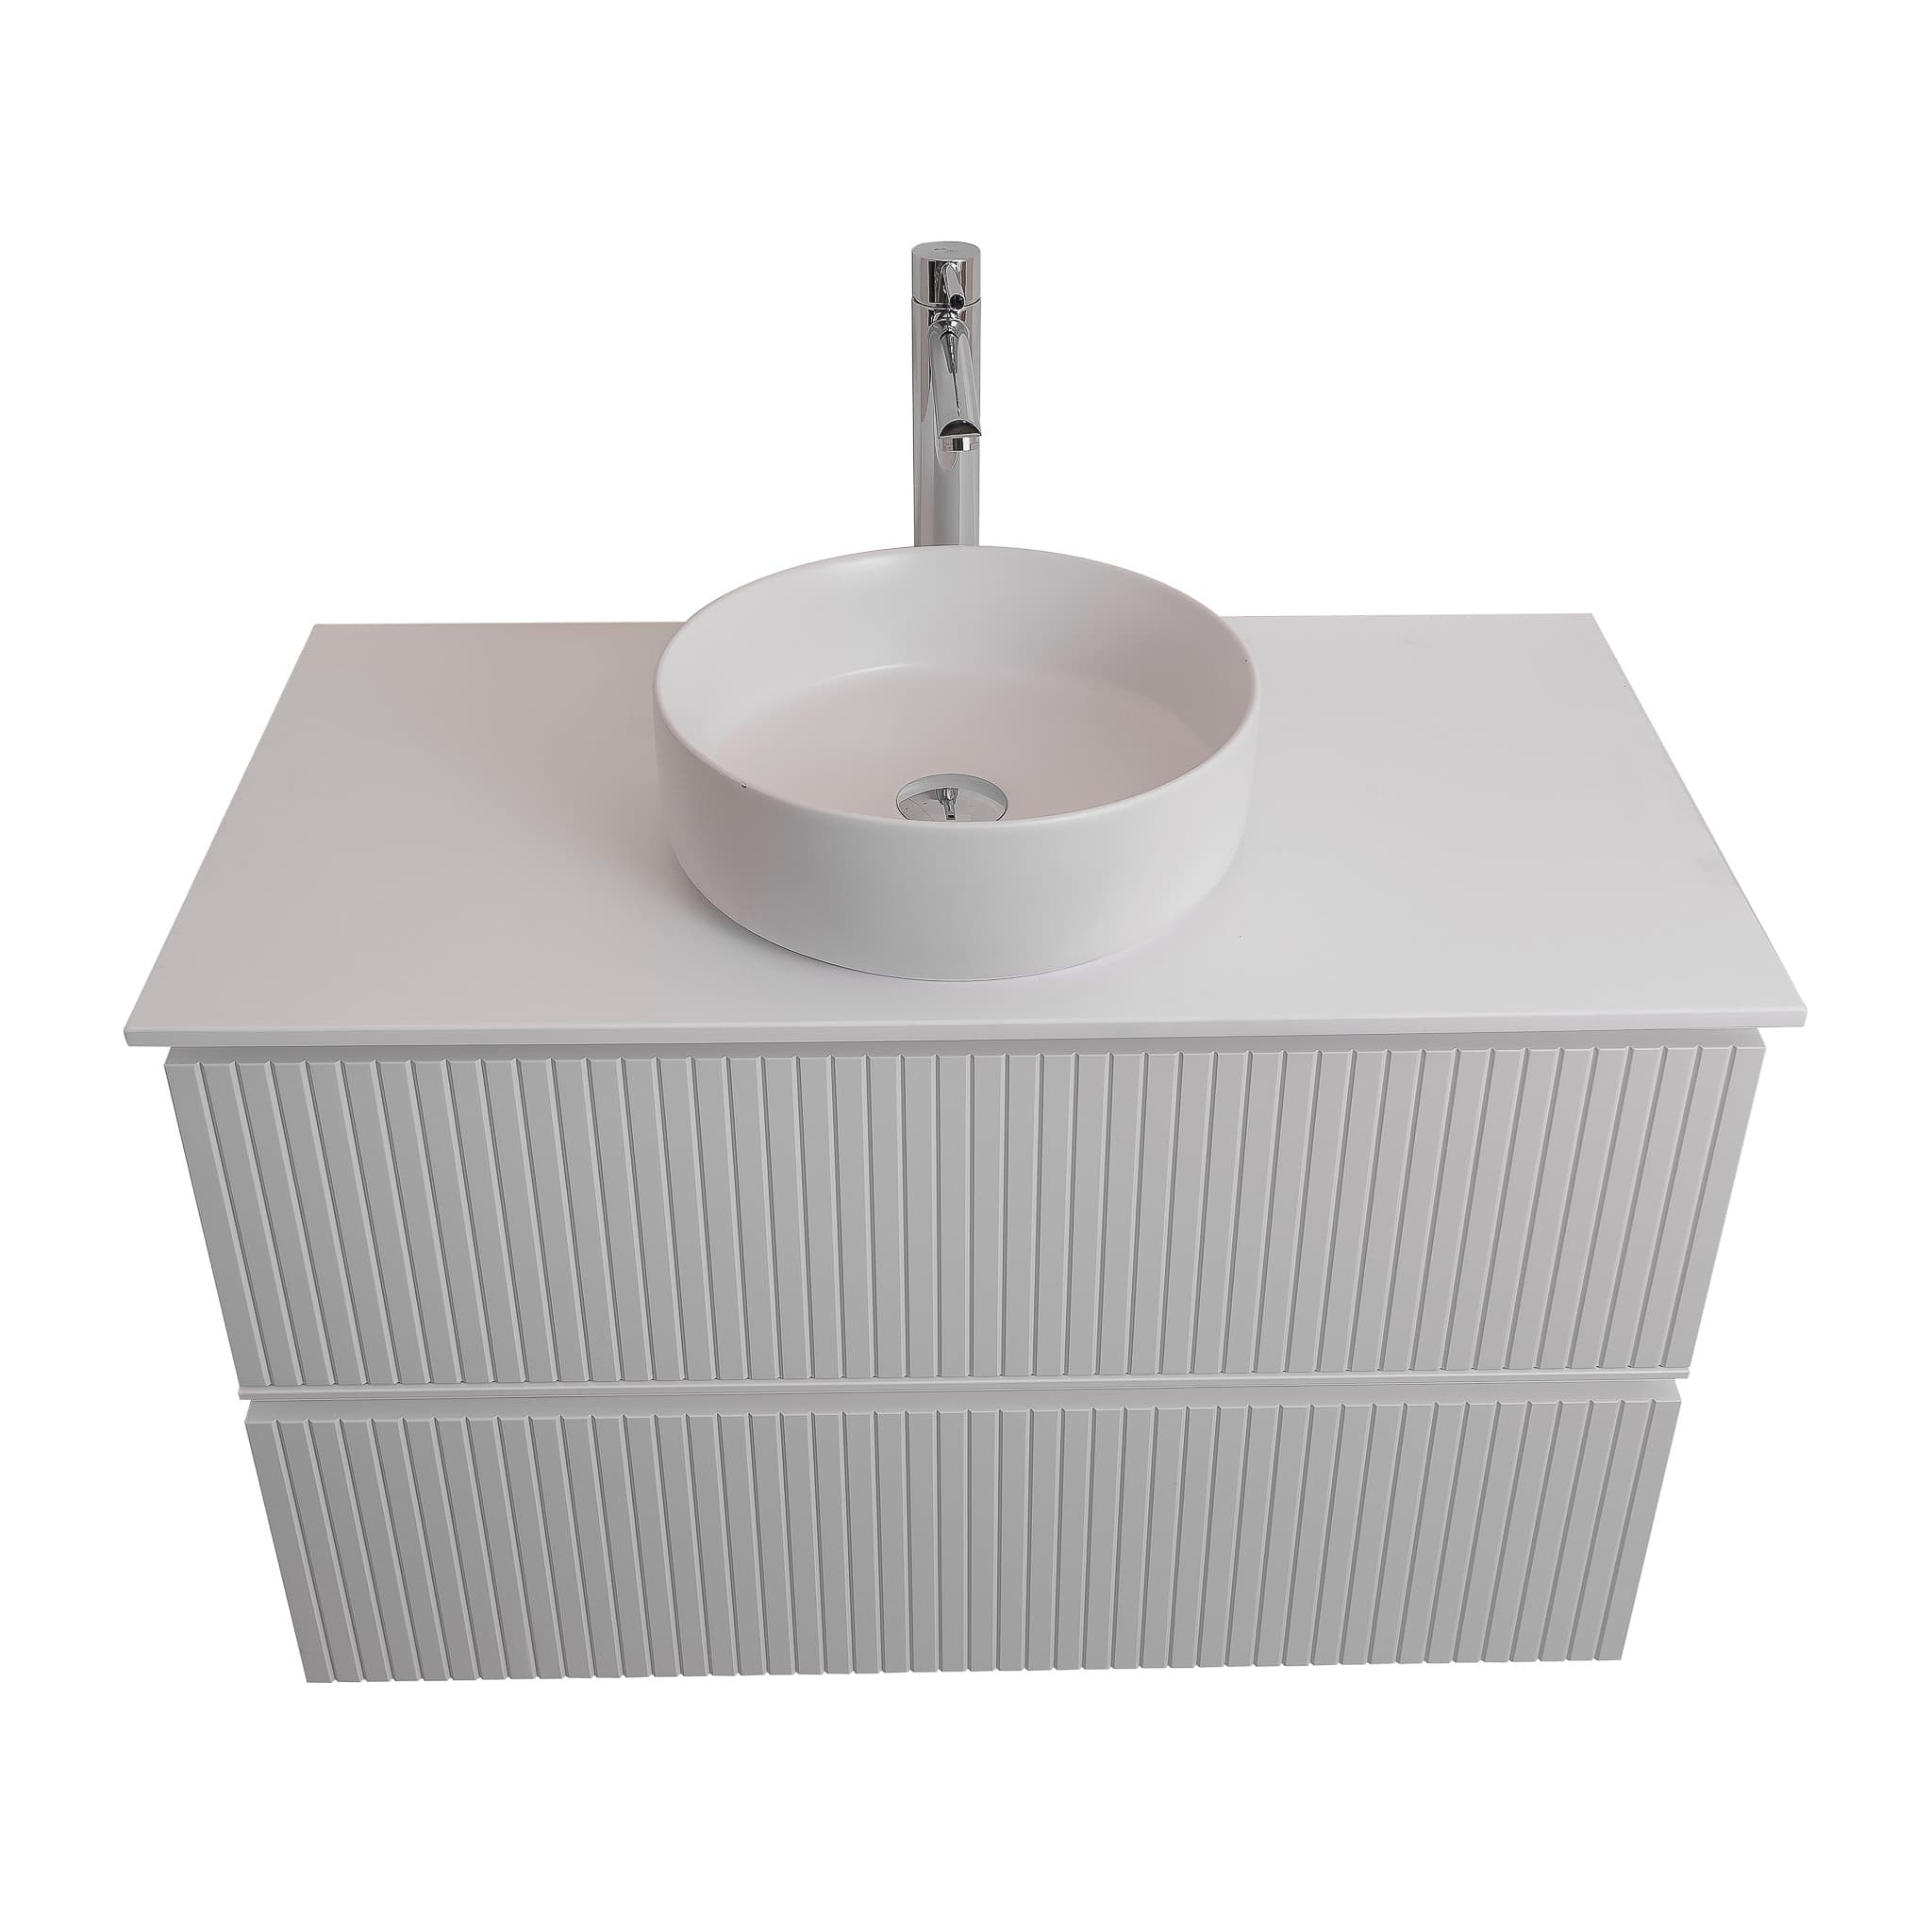 Ares 39.5 Matte White Cabinet, Ares White Top And Ares White Ceramic Basin, Wall Mounted Modern Vanity Set